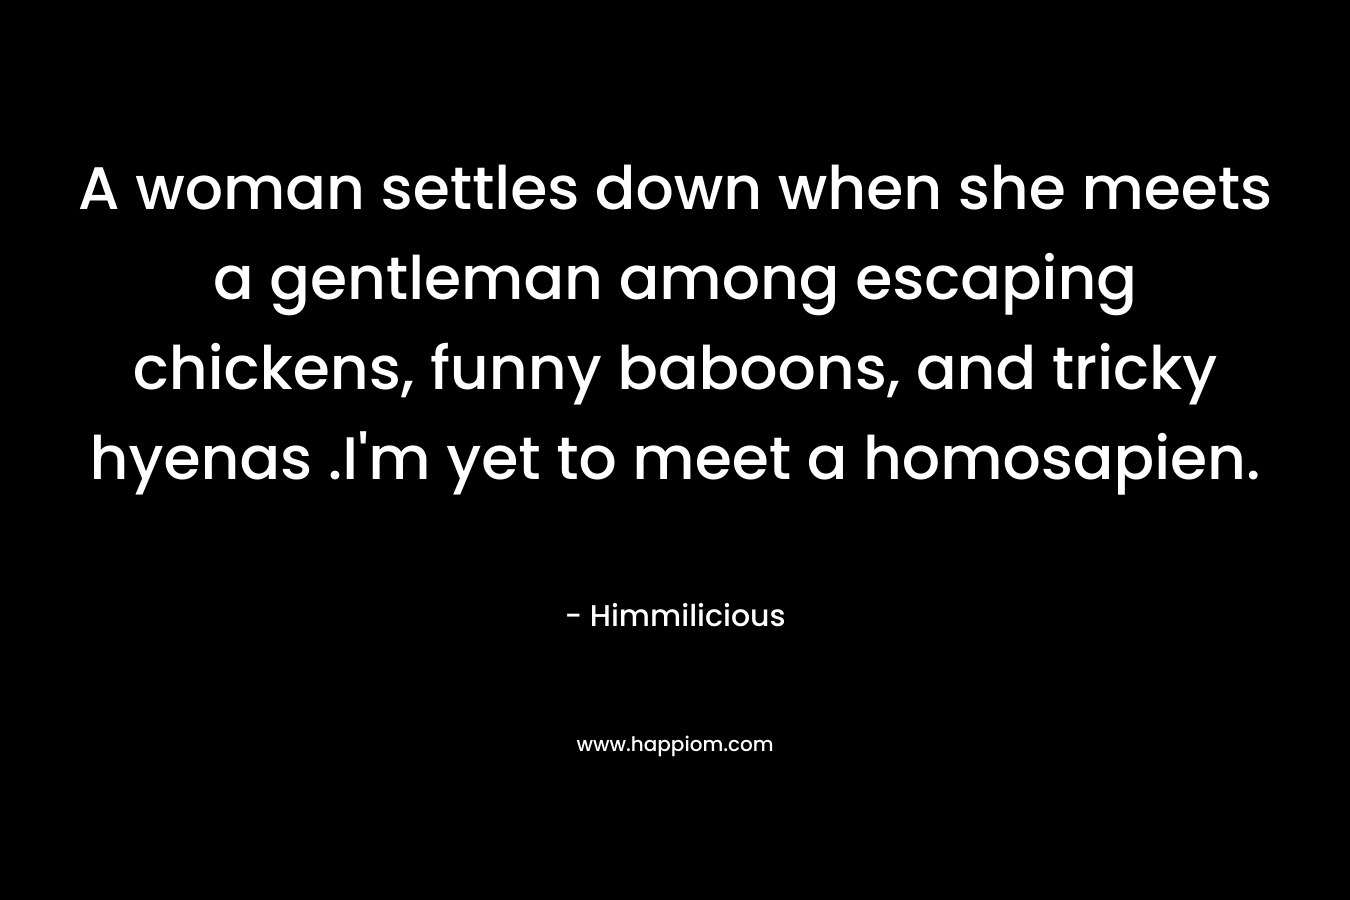 A woman settles down when she meets a gentleman among escaping chickens, funny baboons, and tricky hyenas .I’m yet to meet a homosapien. – Himmilicious